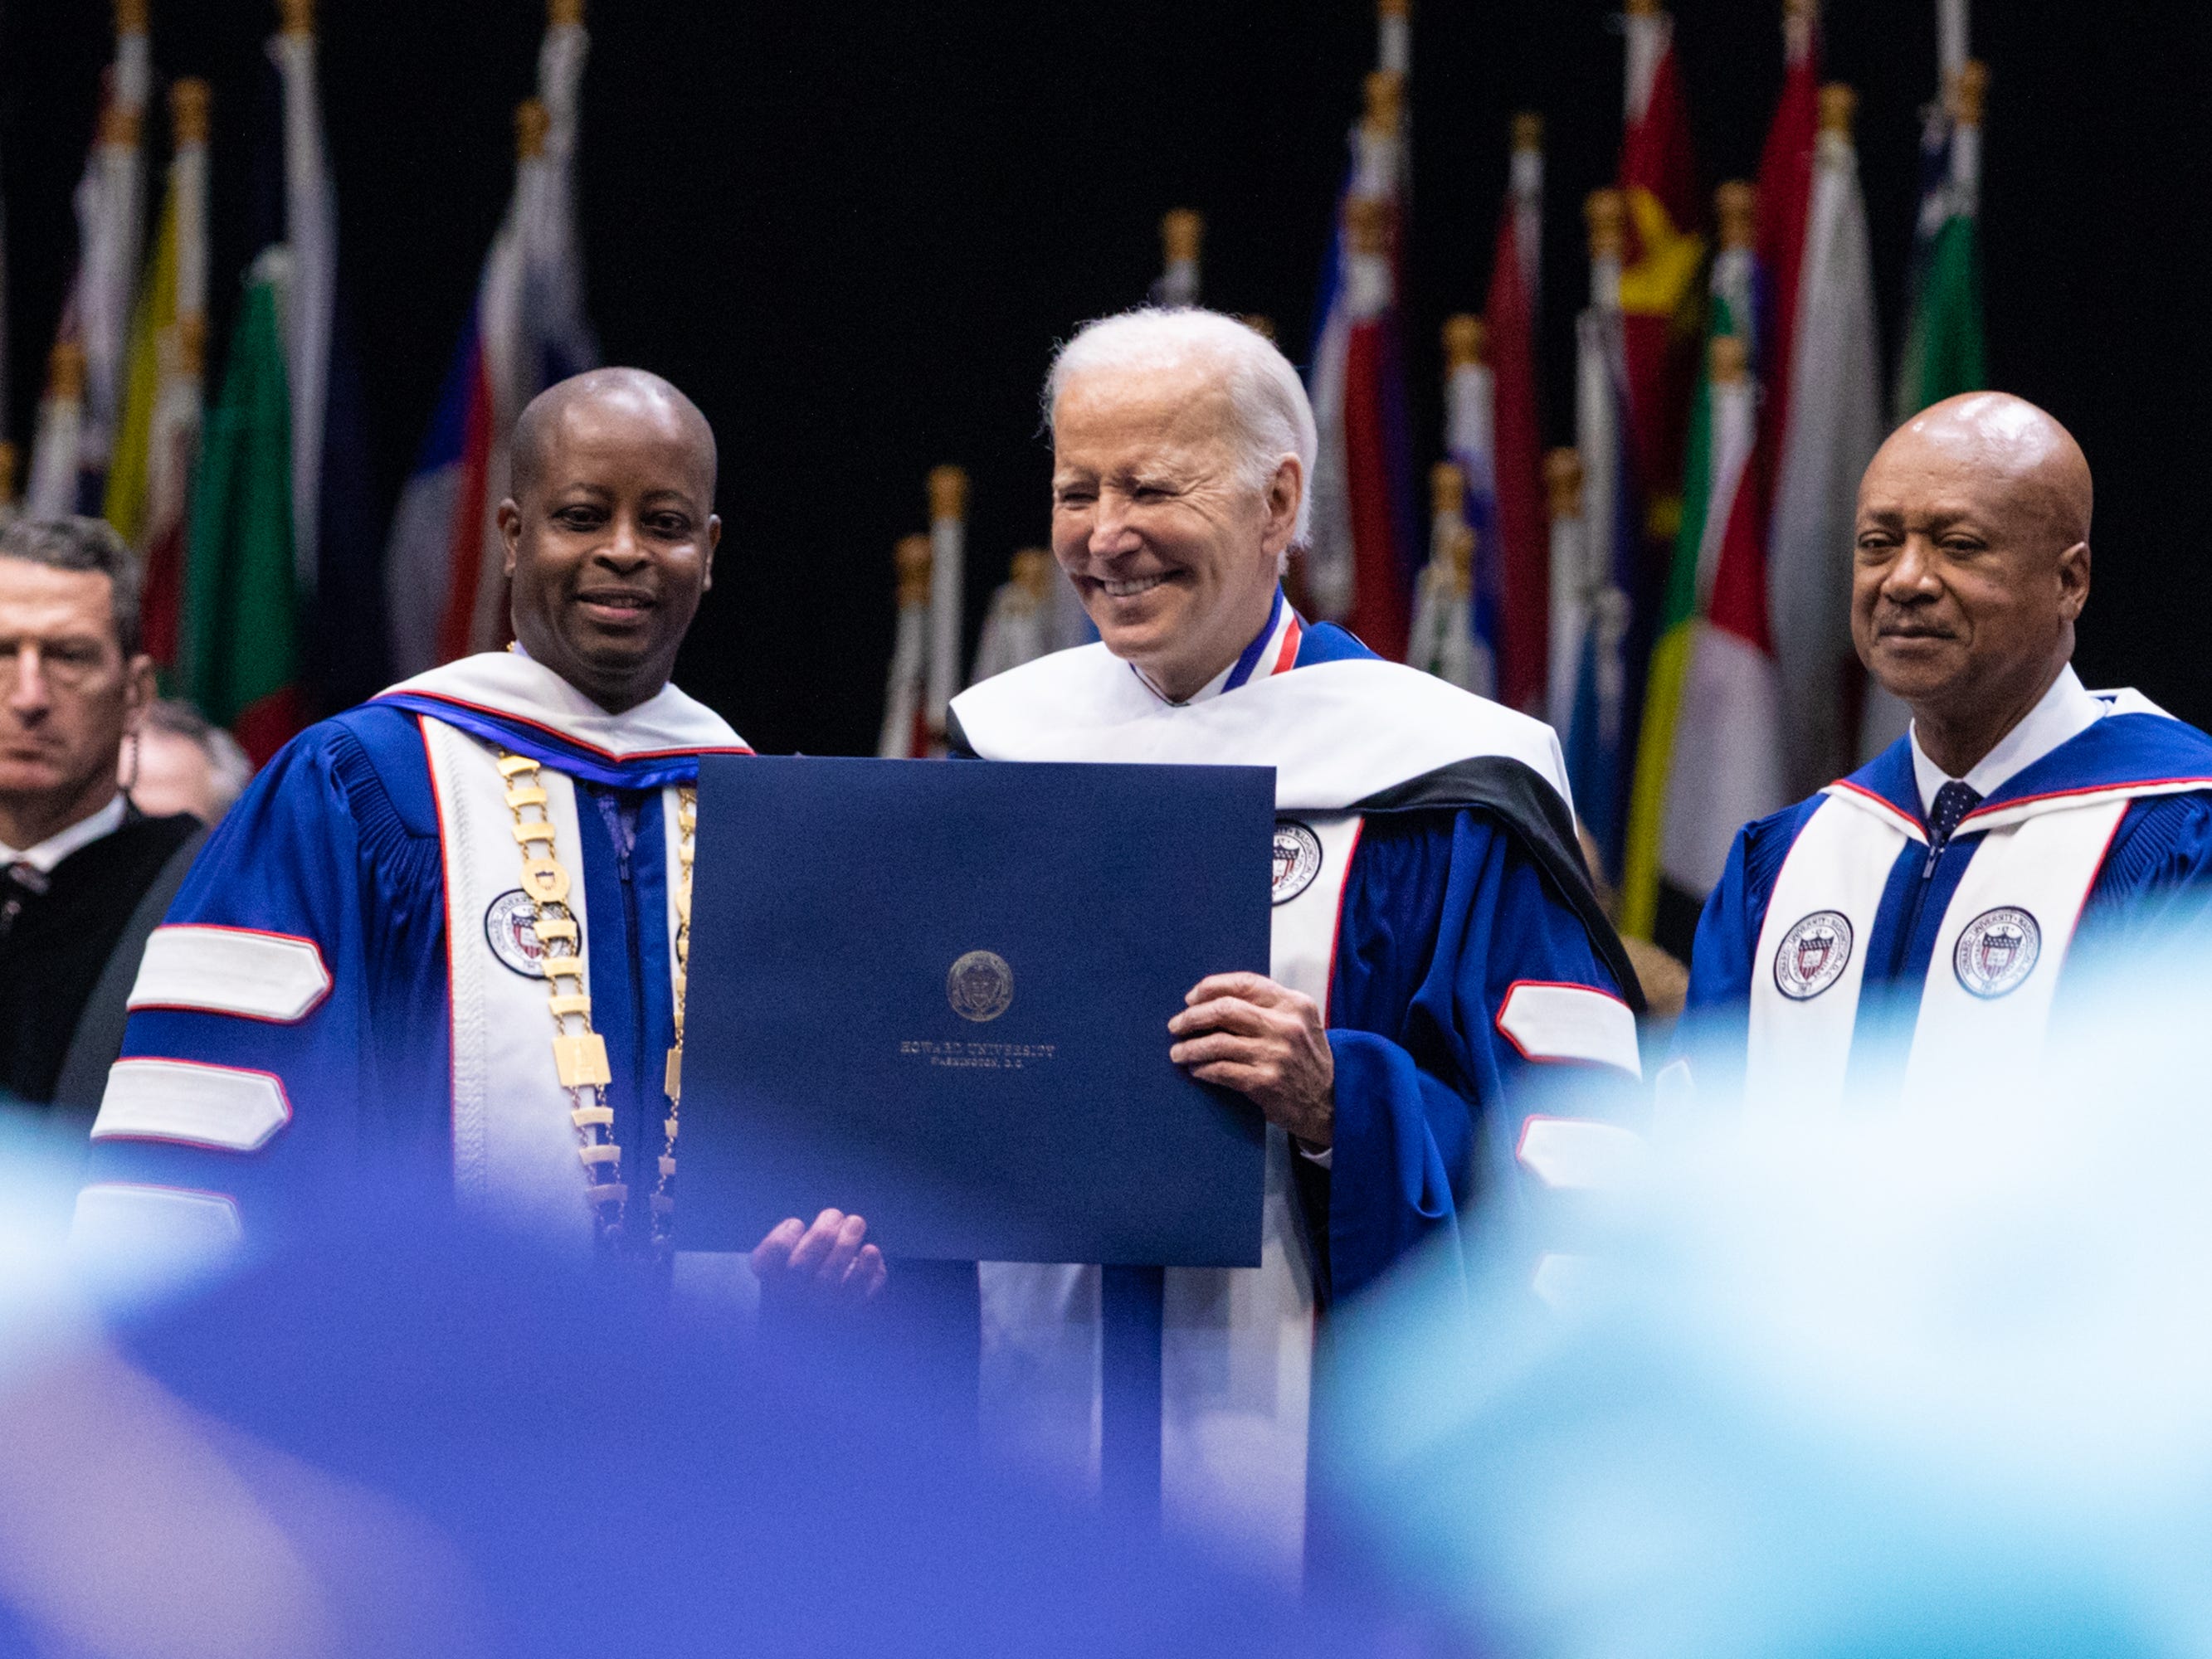 <p>The president received an honorary degree and spoke of the values of America at the HBCU, the alma mater of his vice president, Kamala Harris.</p><p>"We're the only country founded on an idea — not geography, not religion, not ethnicity, but an idea. The sacred proposition, rooted in Scripture and enshrined in the Declaration of Independence, that we're all created equal in the image of God and deserve to be treated equally throughout our lives," Biden said. "While we've never fully lived up to that promise, we never before fully walked away from it."</p><p>Biden also addressed many of the causes his campaign has pushed over the years, including the right to choose and "to put democracy on the ballot."</p><p>"We can finally resolve those ongoing questions about who we are as a nation. That puts strength of our diversity at the center of American life," he continued. "A future that celebrates and learns from history. A future for all Americans. A future I see you leading. And I'm not, again, exaggerating. You are going to be leading it."</p>